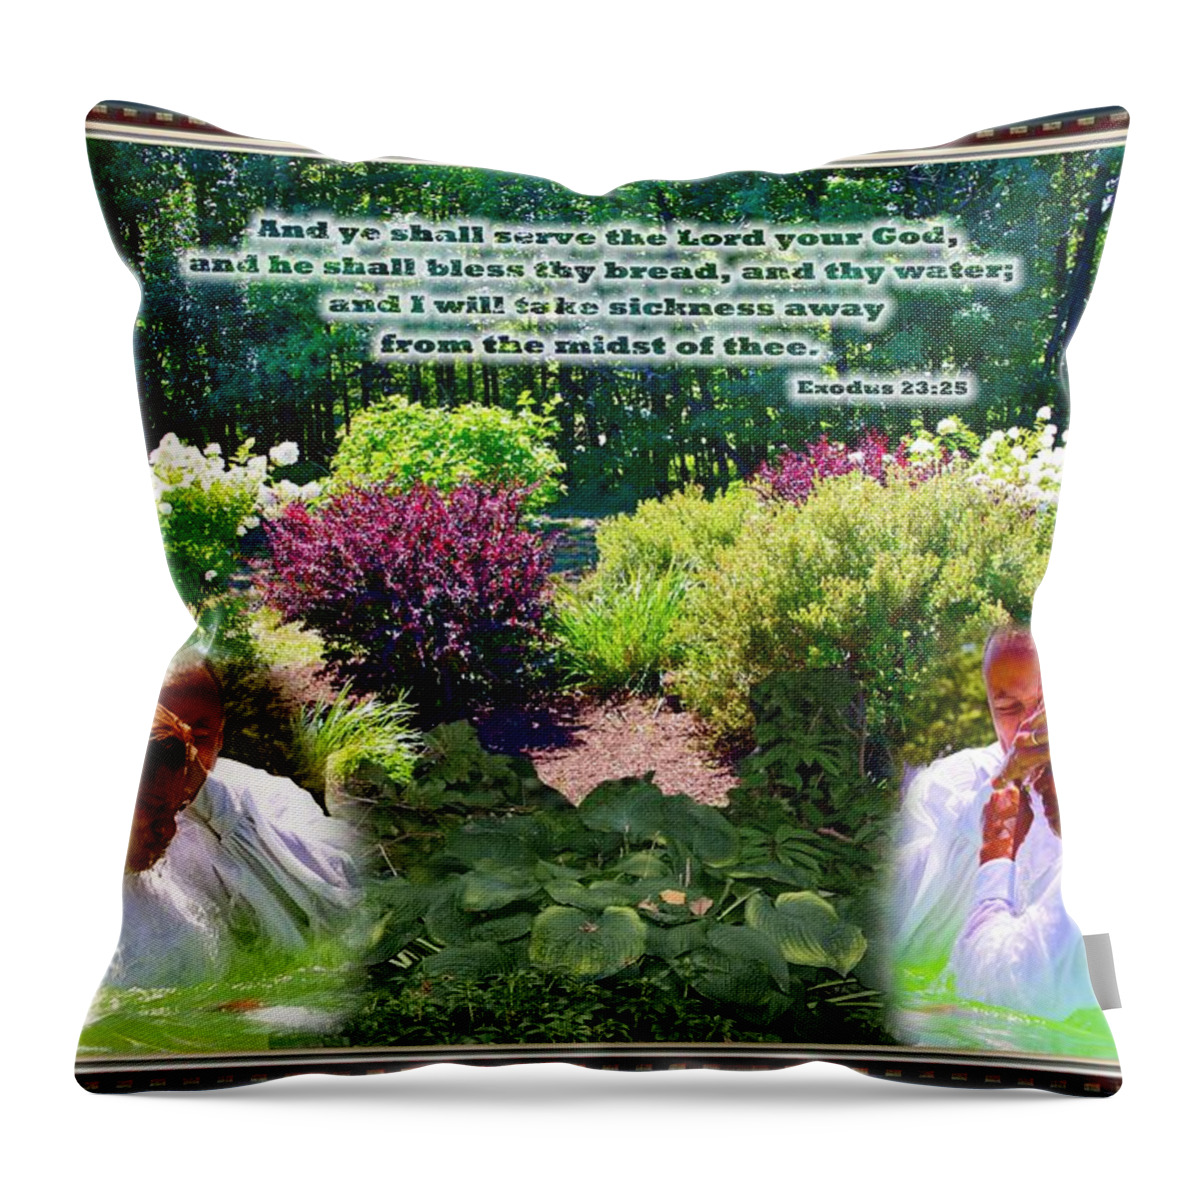 God's Natural Land Throw Pillow featuring the photograph And Ye Shall Serve The Lord - Framed by Terry Wallace